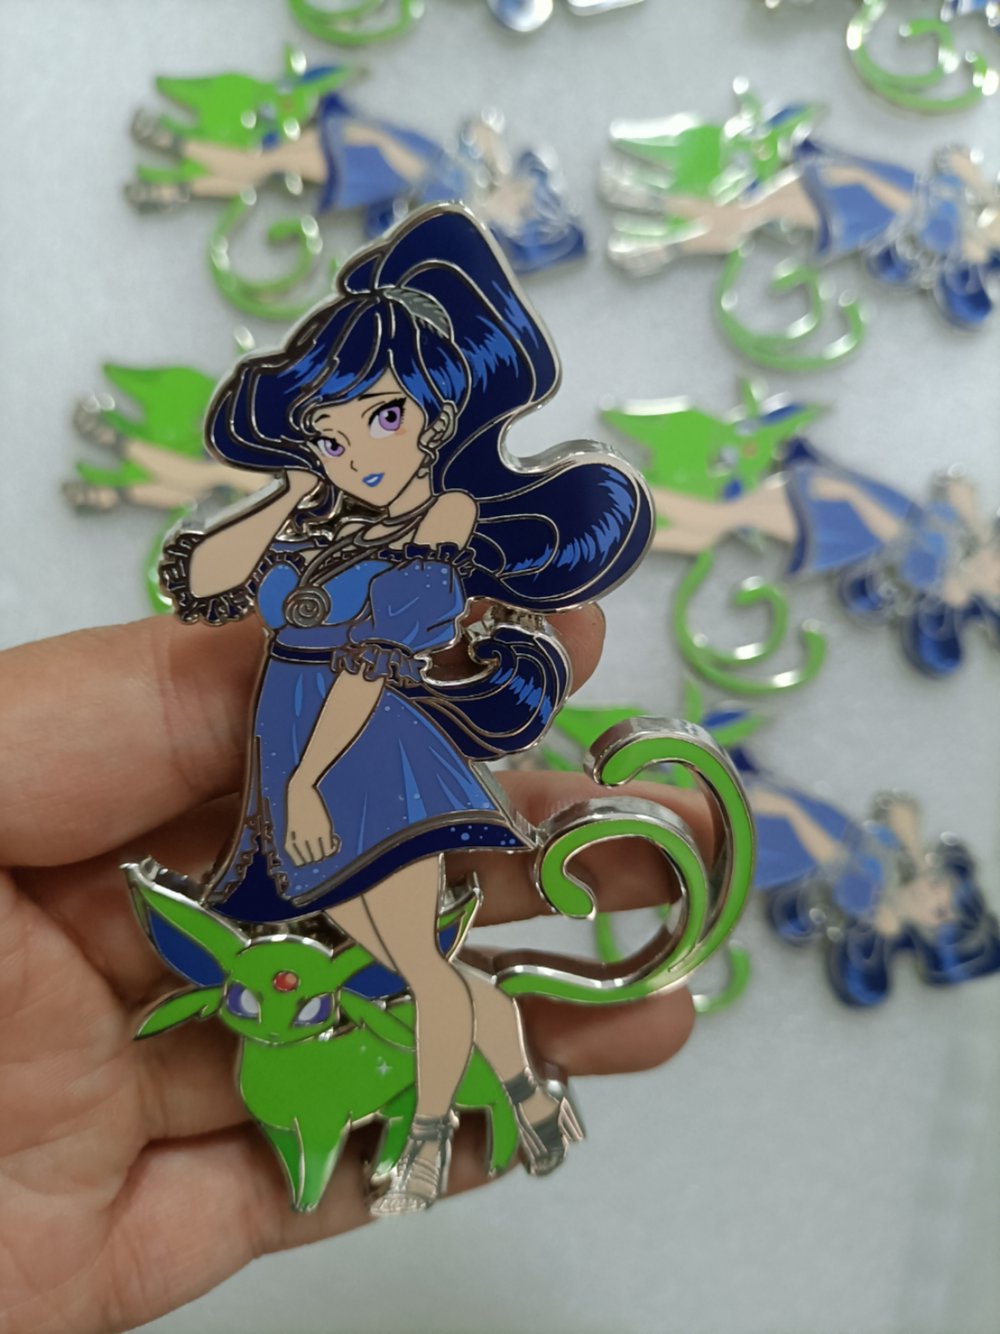 SALE! Trainer Girl and Psychic Limited Edition 25 Shiny pin